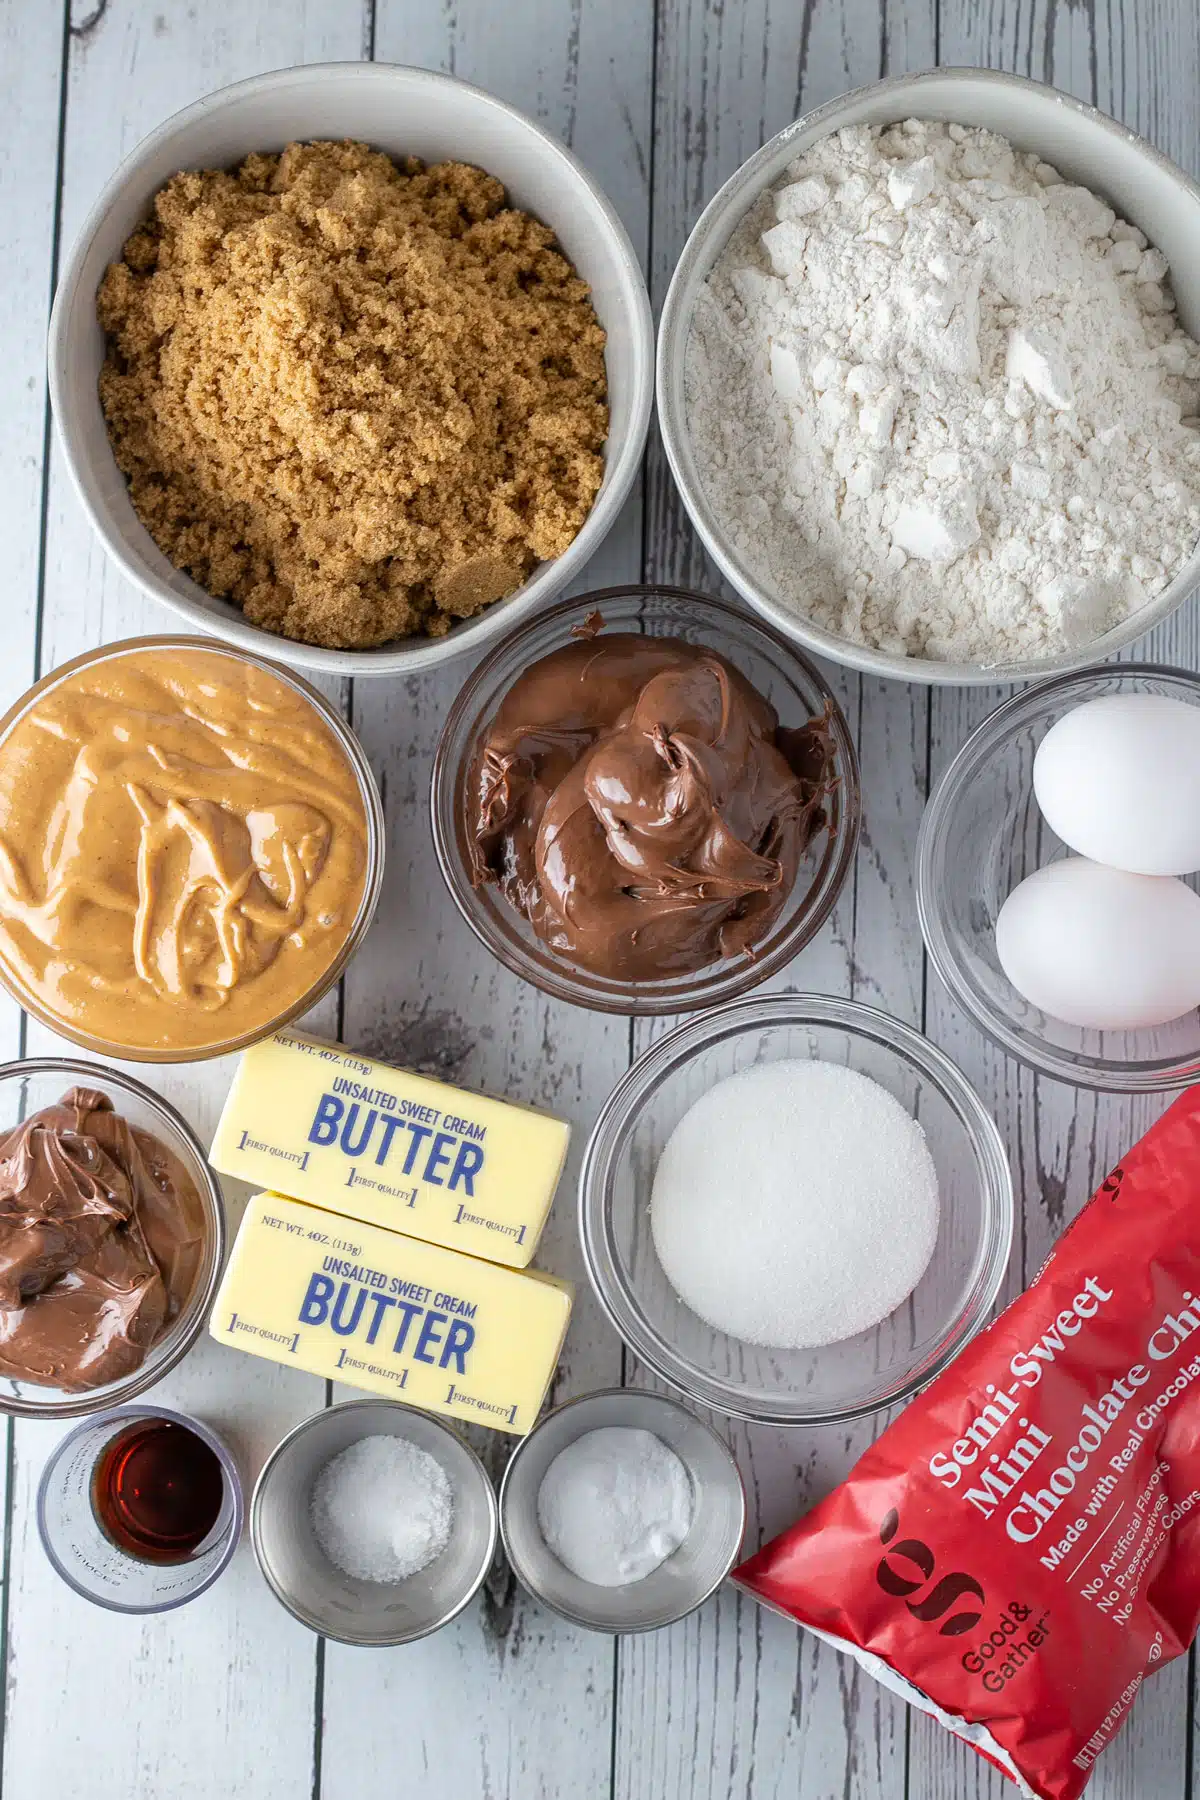 Peanut butter Nutella cookies ingredients measured out and ready to combine to make these fabulous nutty cookies.